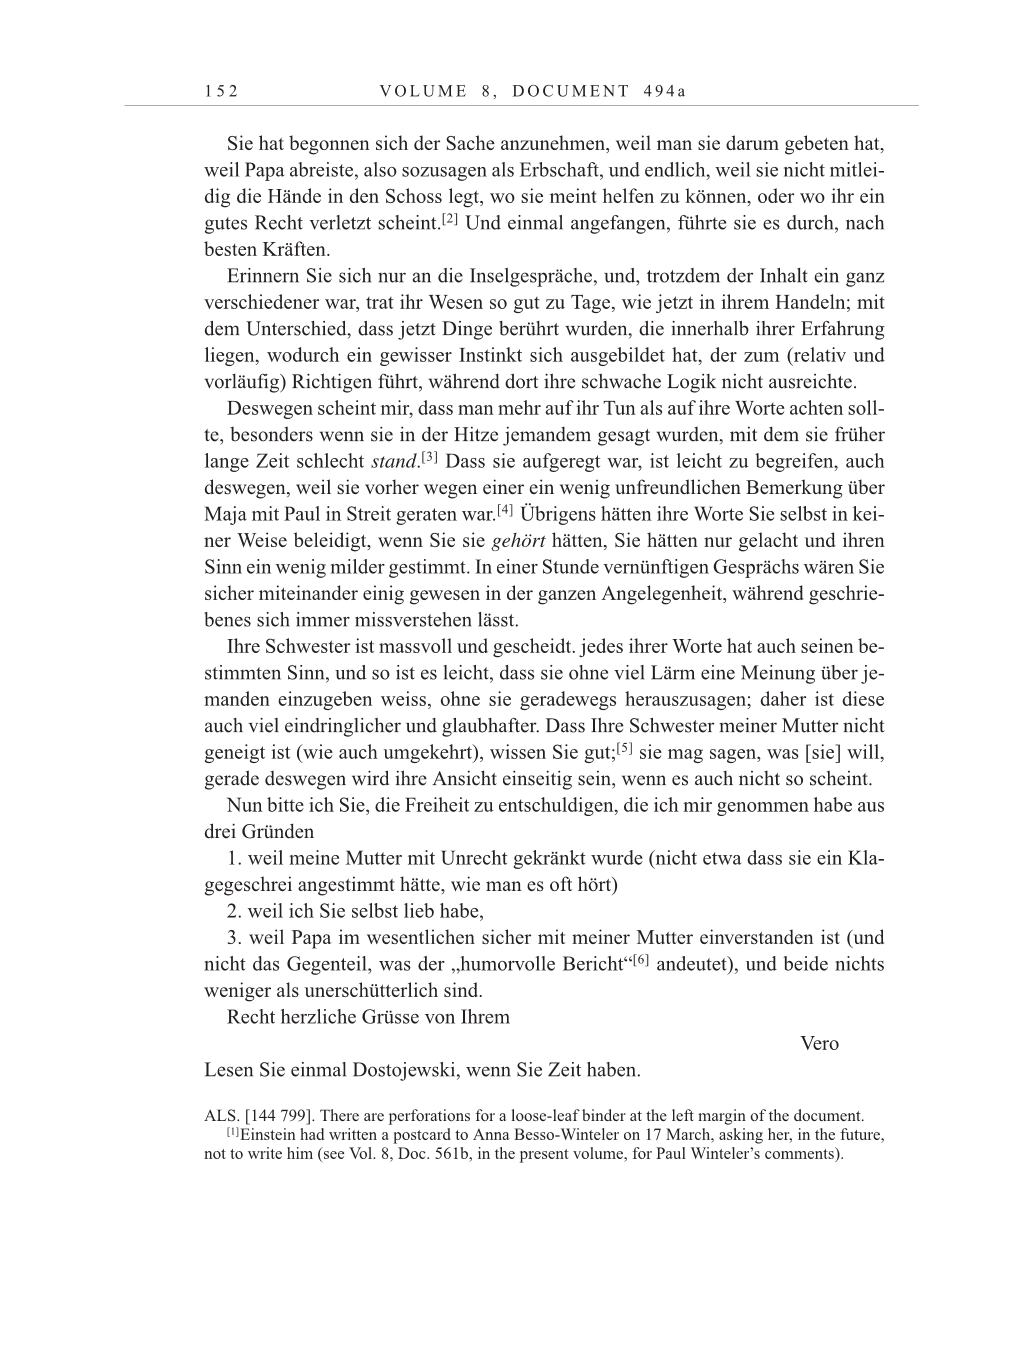 Volume 10: The Berlin Years: Correspondence May-December 1920 / Supplementary Correspondence 1909-1920 page 152